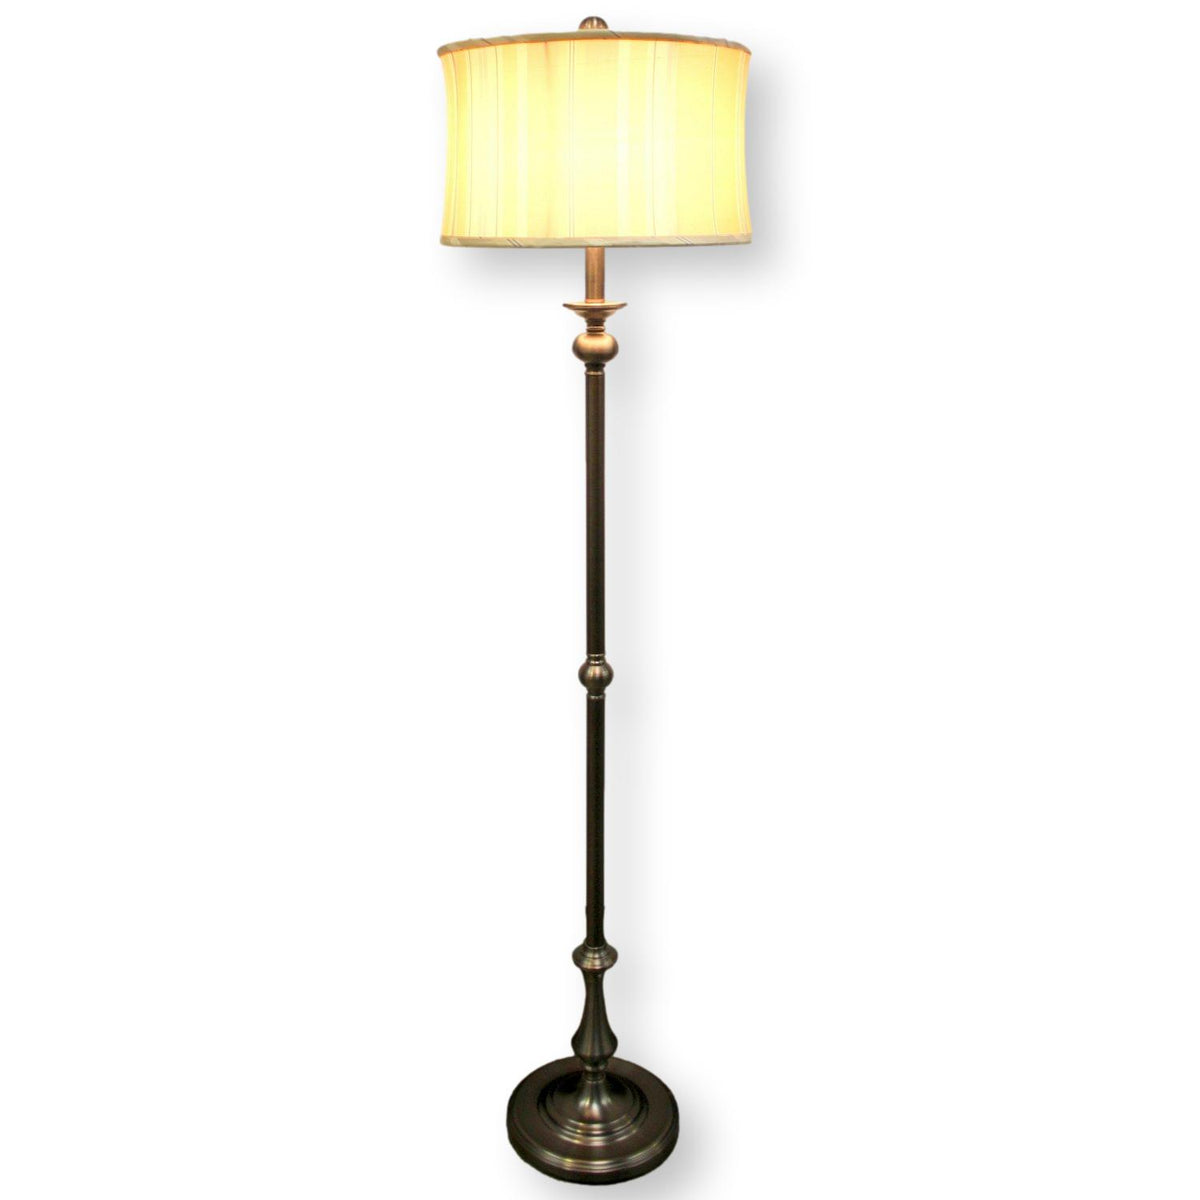 Burnished Steel Floor Lamp w/Striped Shade